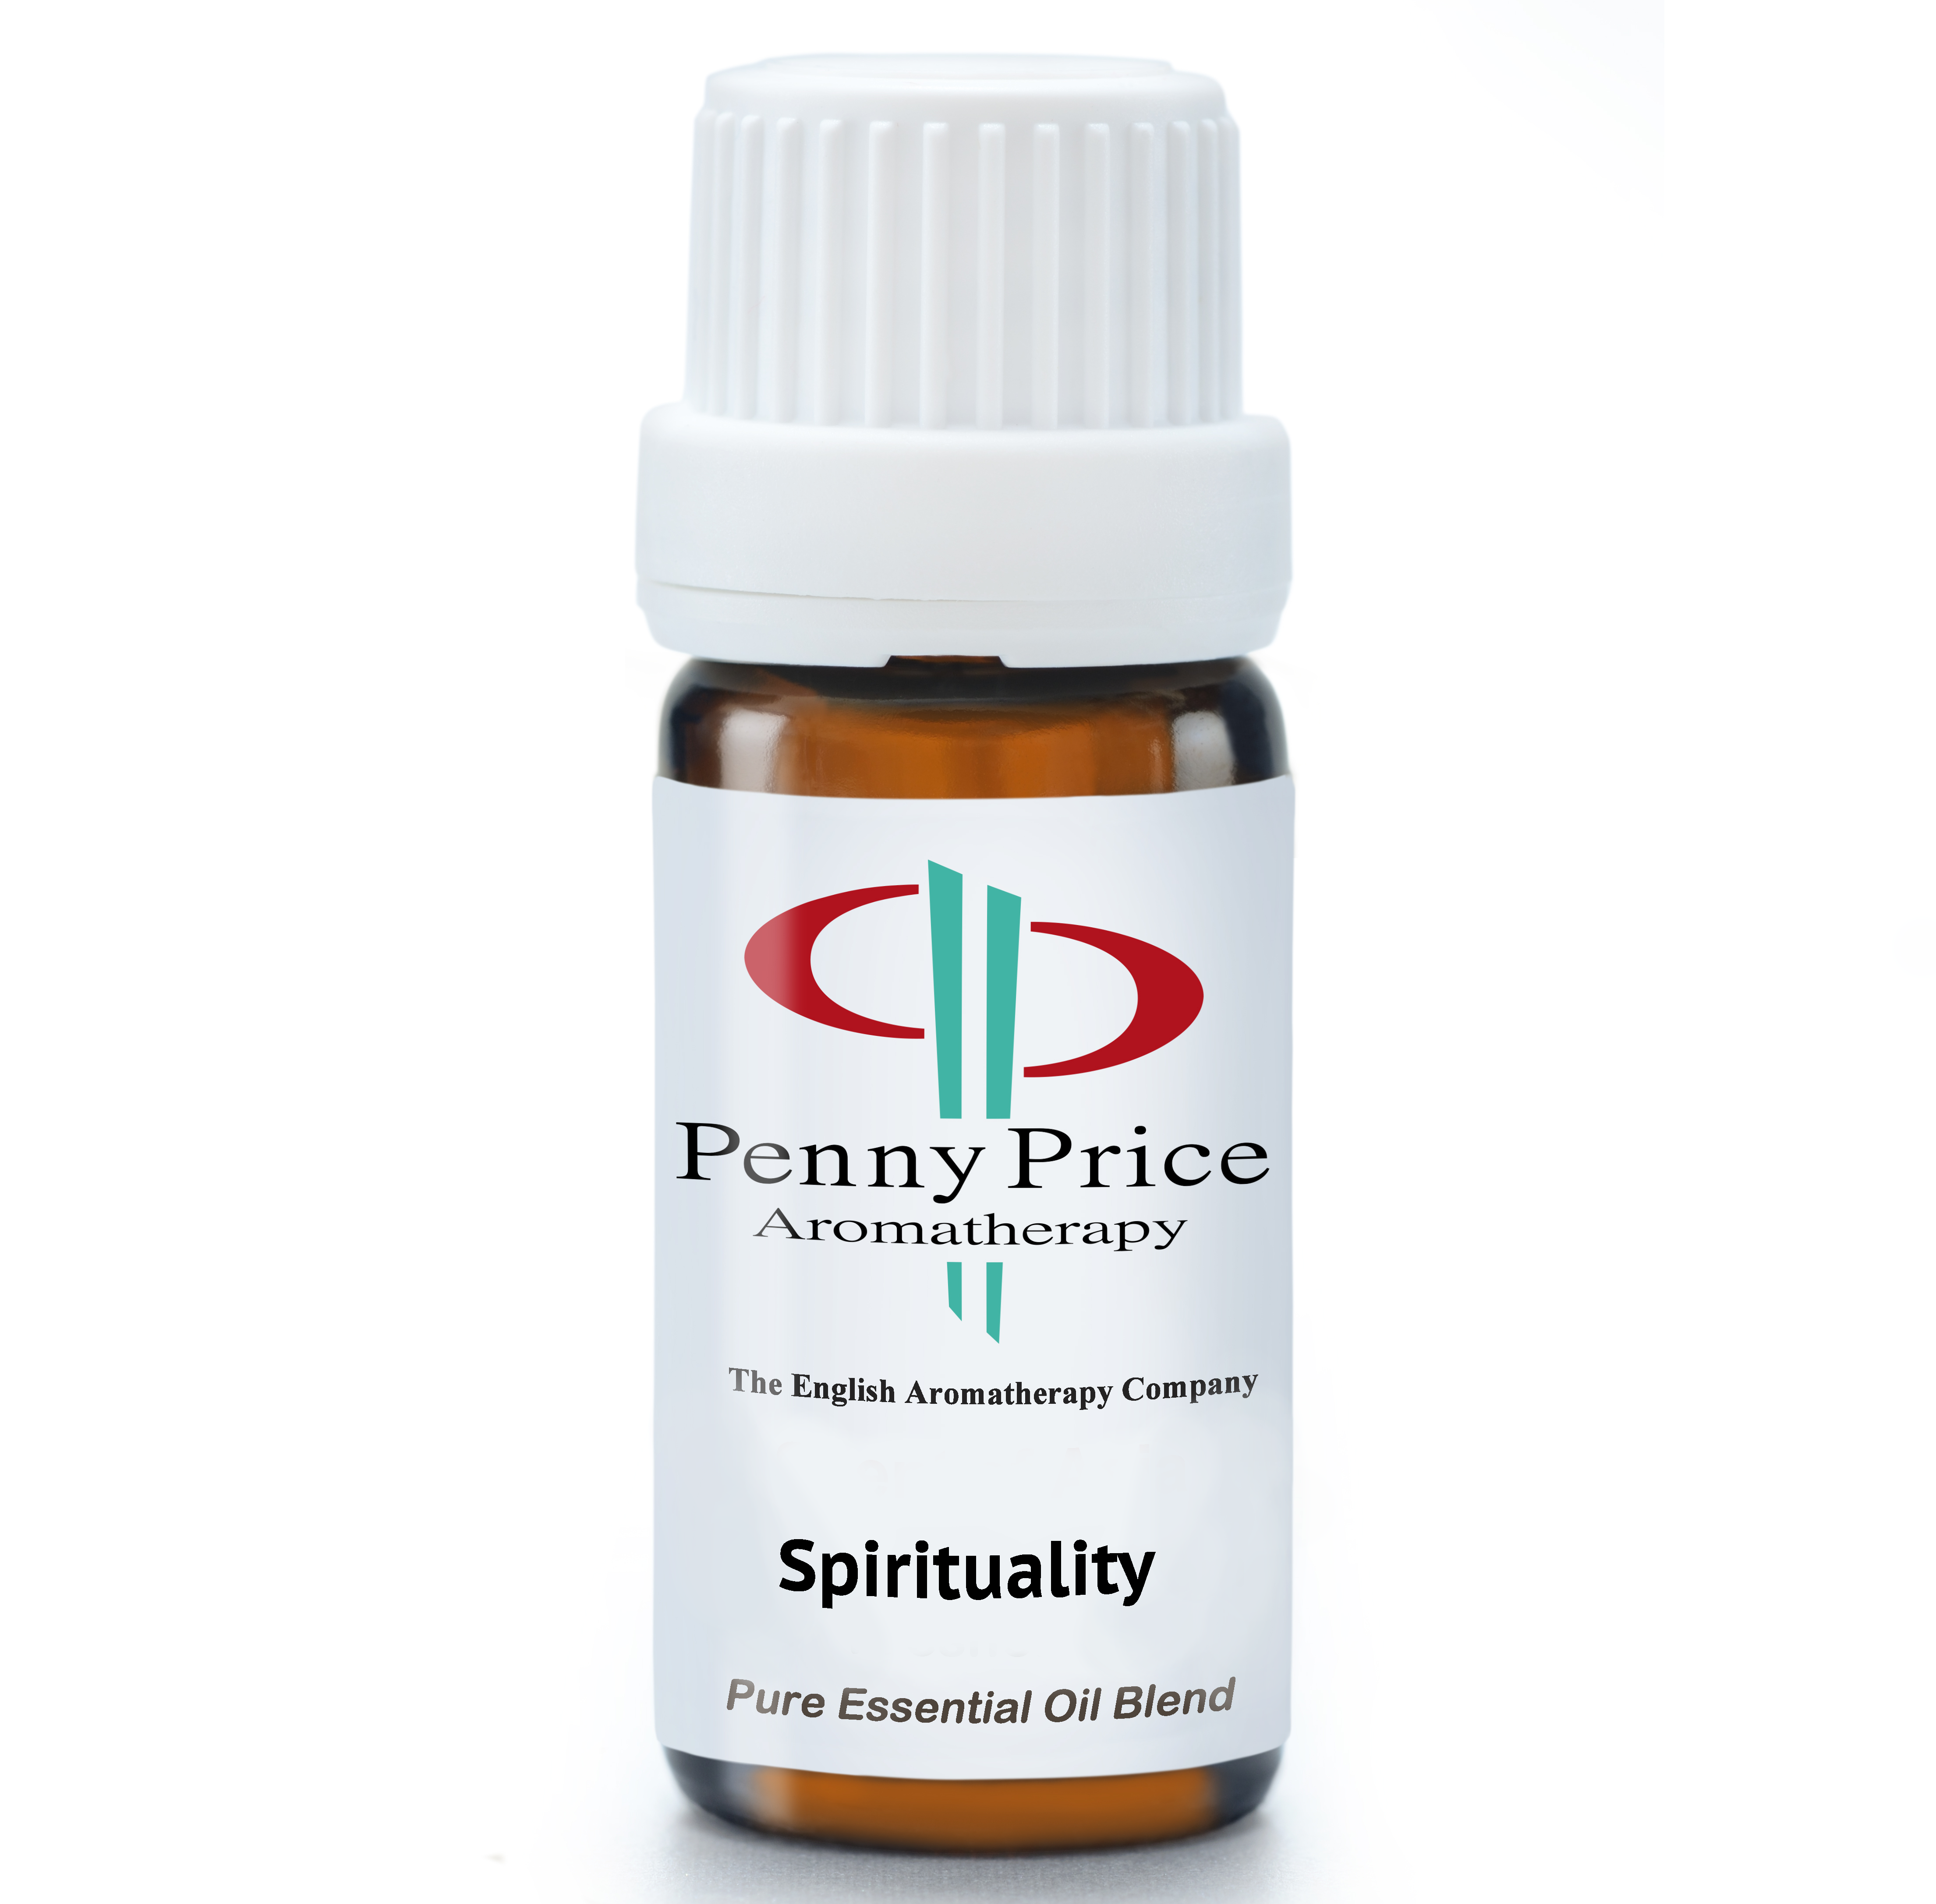 #Spiritual Essential Oil Blend. #Penny Price.  #Penny Price Aromatherapy.  #IFPA Aromatherapy.  #IFPA & #IFA.  #Aromatherapy Courses.